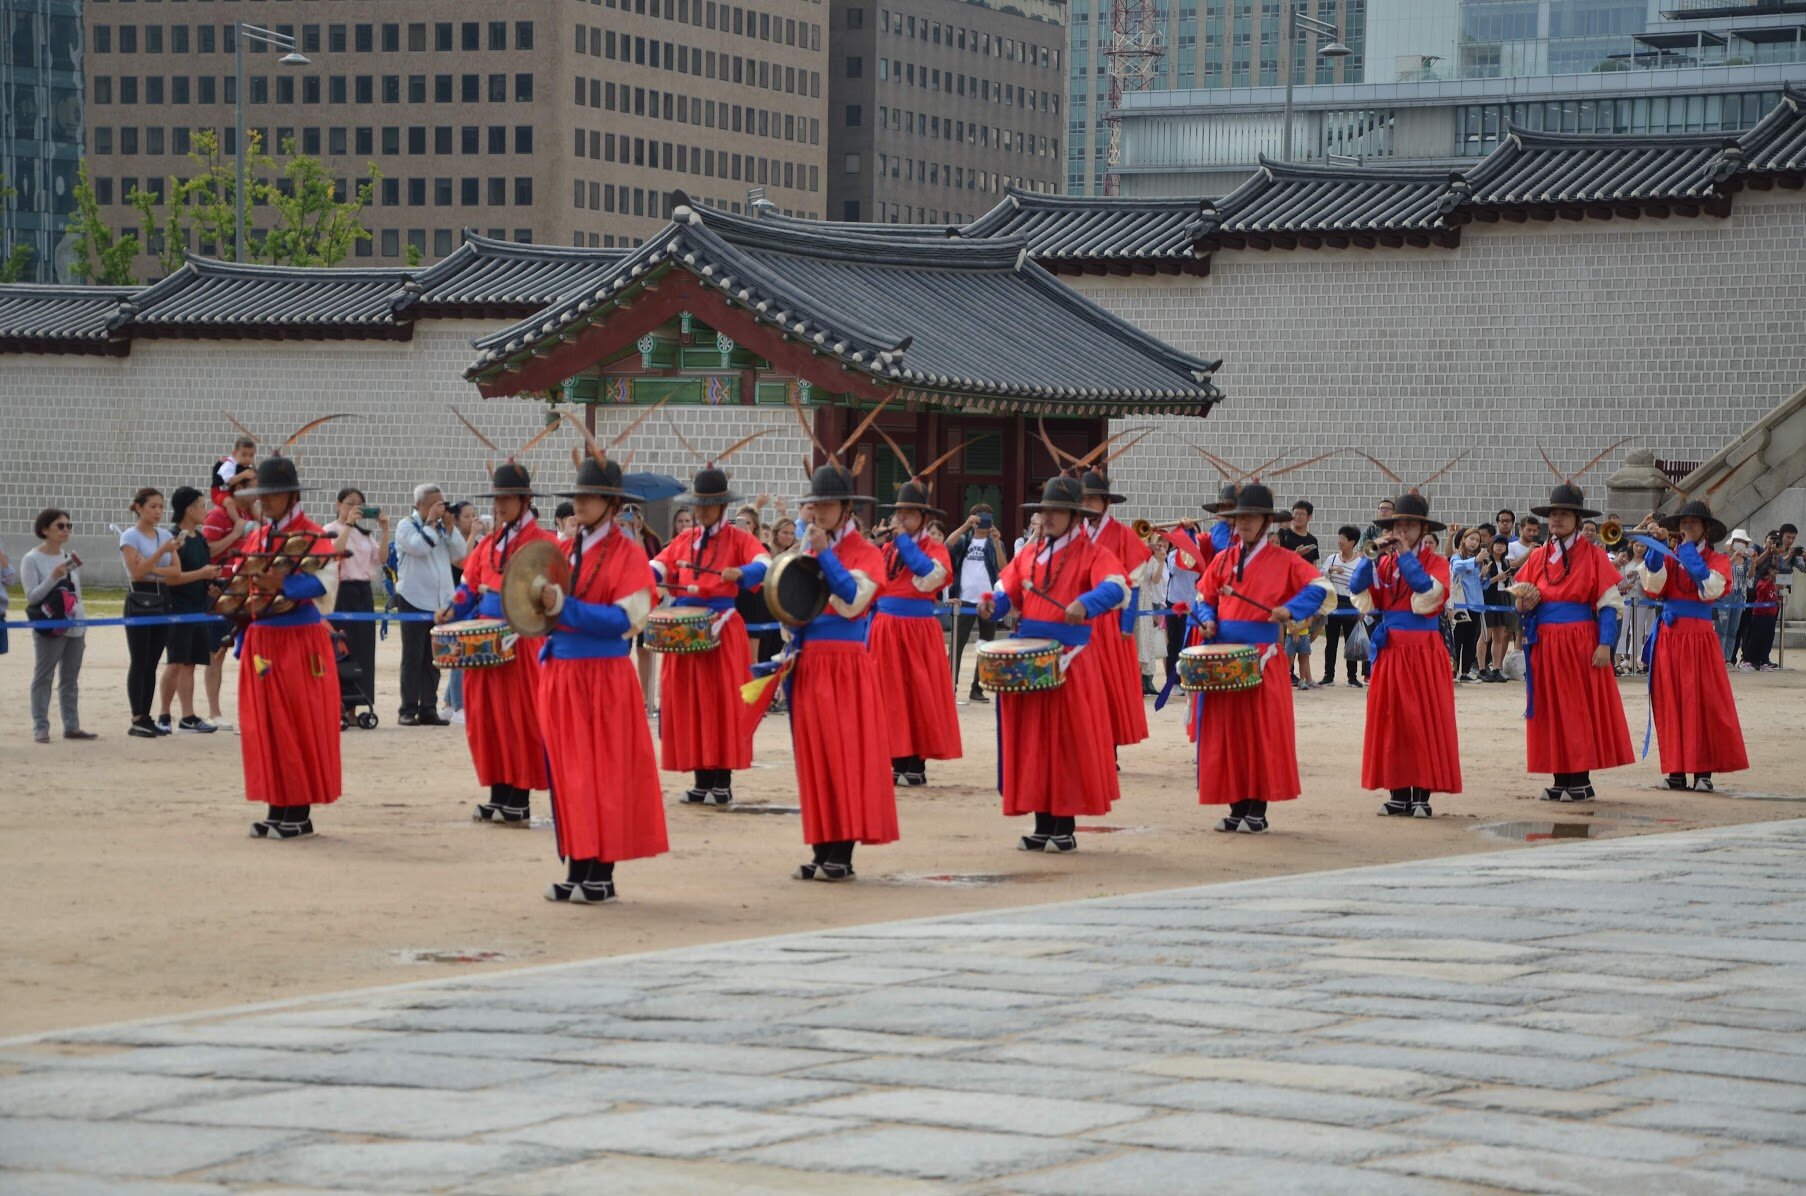 Changing of the guards at Gyeongbokgung Palace in Seoul, South Korea